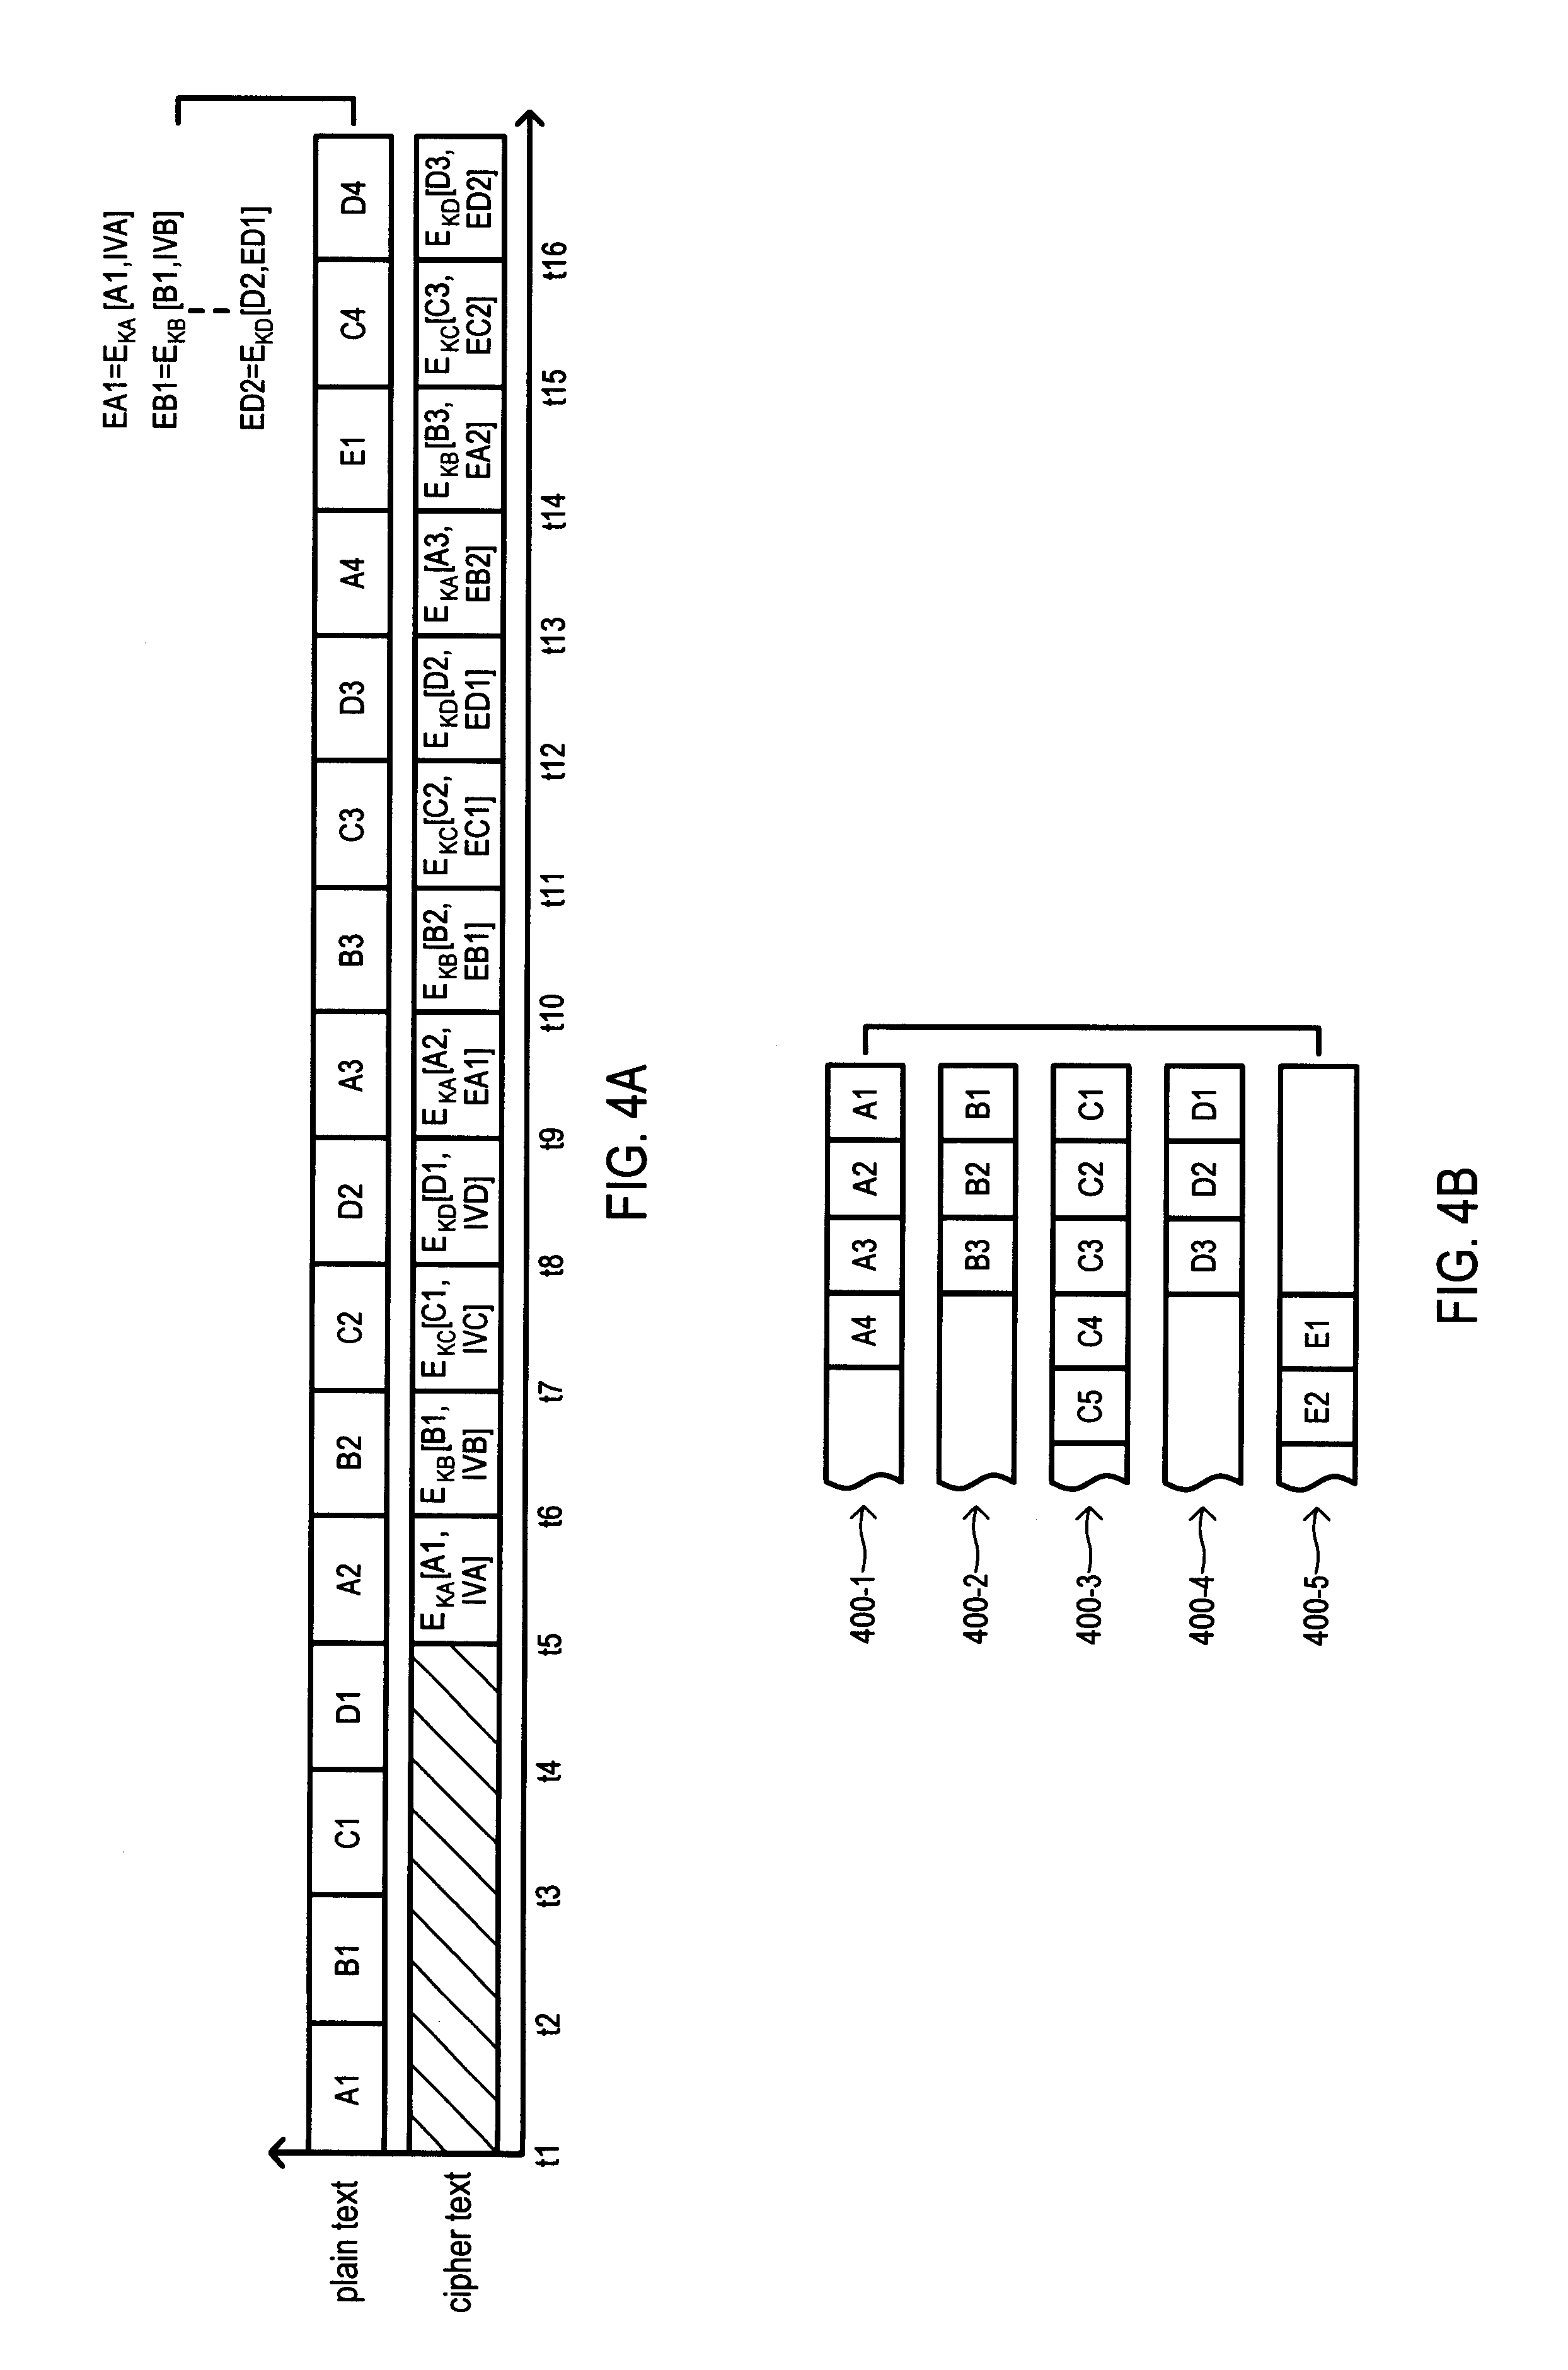 High throughput system for encryption and other data operations